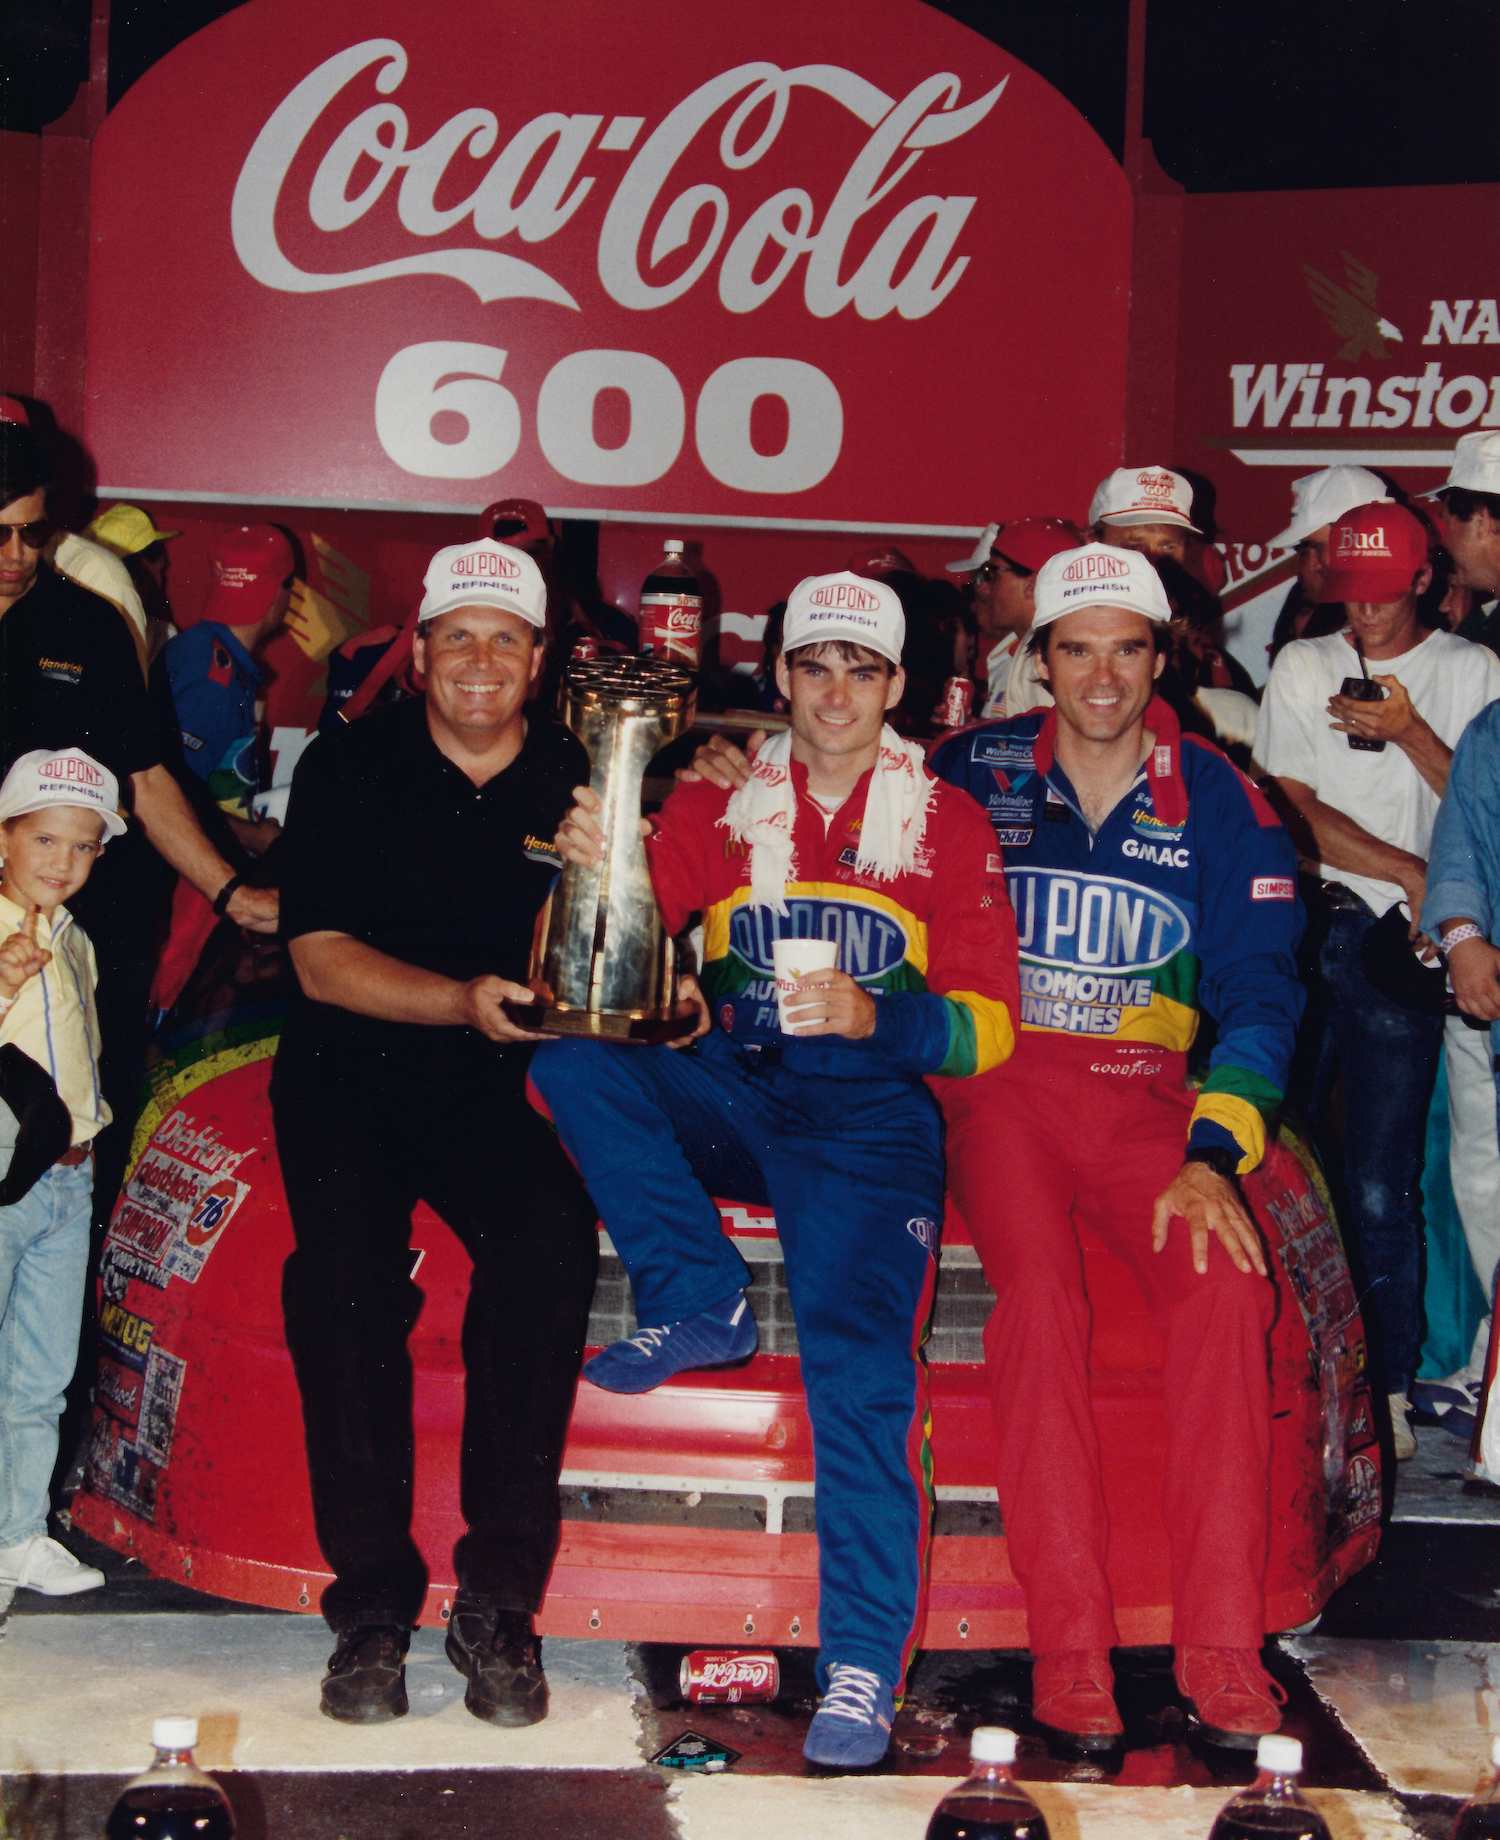 Our first Cup win was at Charlotte in 1994. Left to right: Mr. H, Jeff, and me. Ray Evernham Enterprises Archives